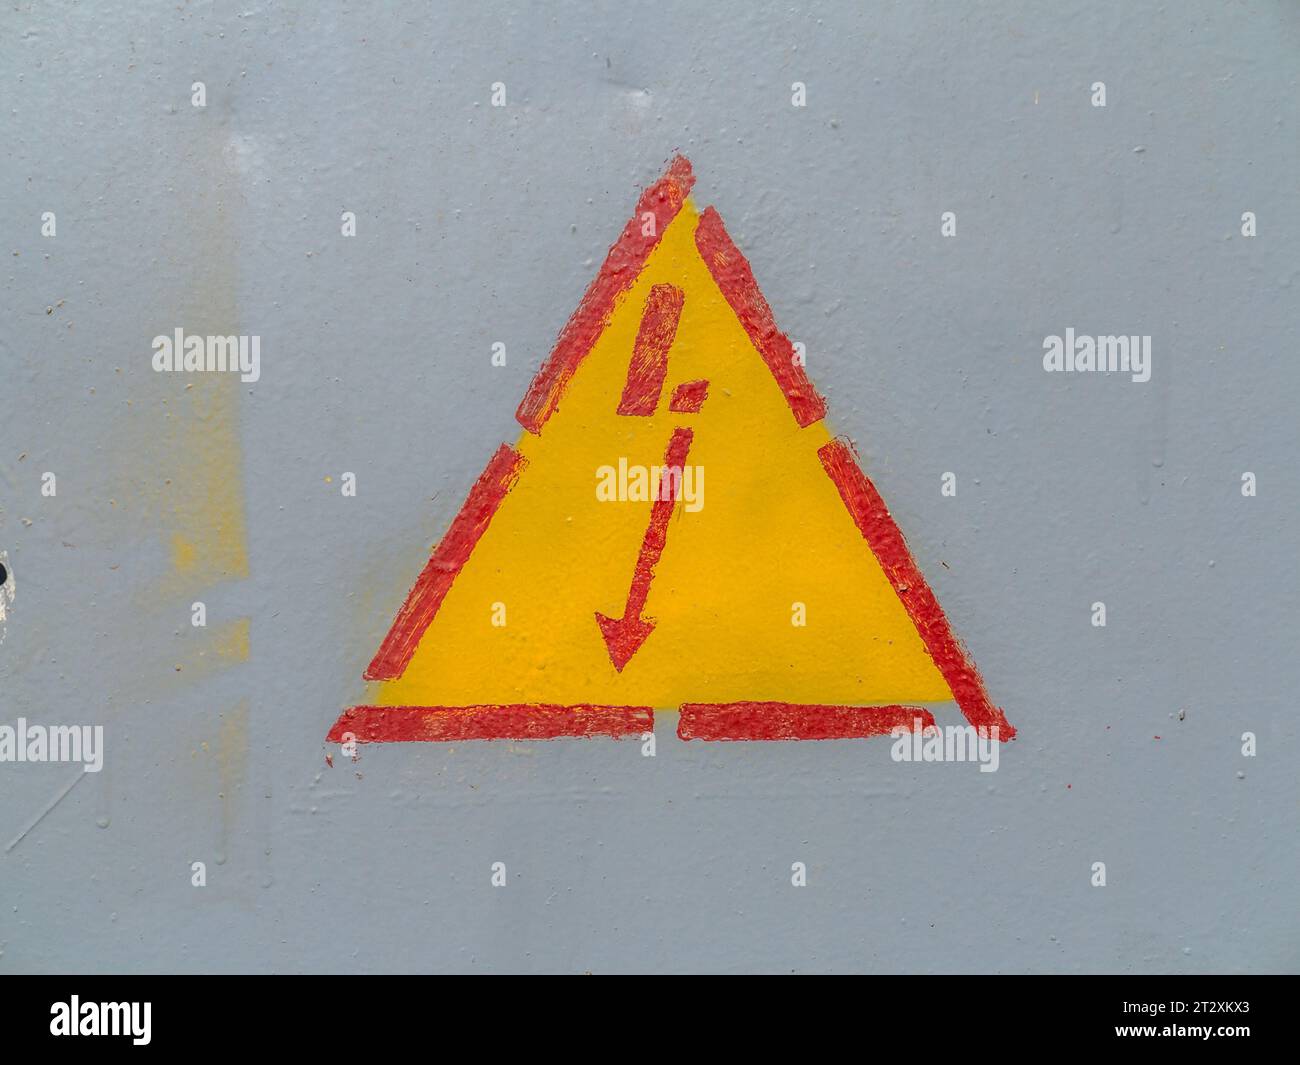 Energy Safety Topics - High Voltage Sign Stock Photo